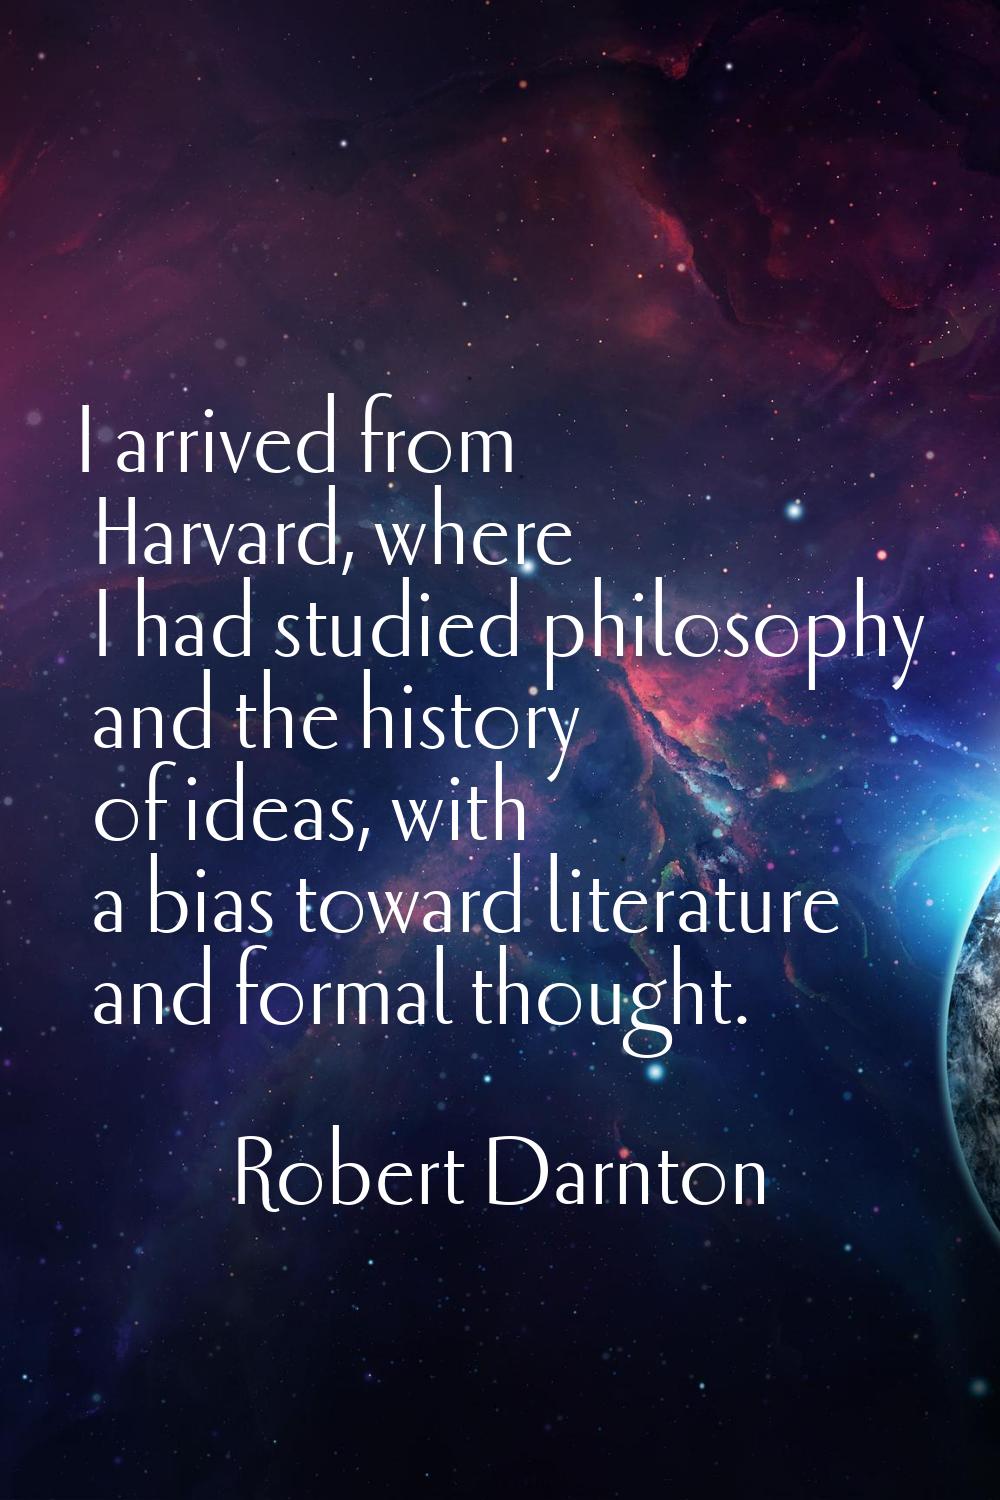 I arrived from Harvard, where I had studied philosophy and the history of ideas, with a bias toward